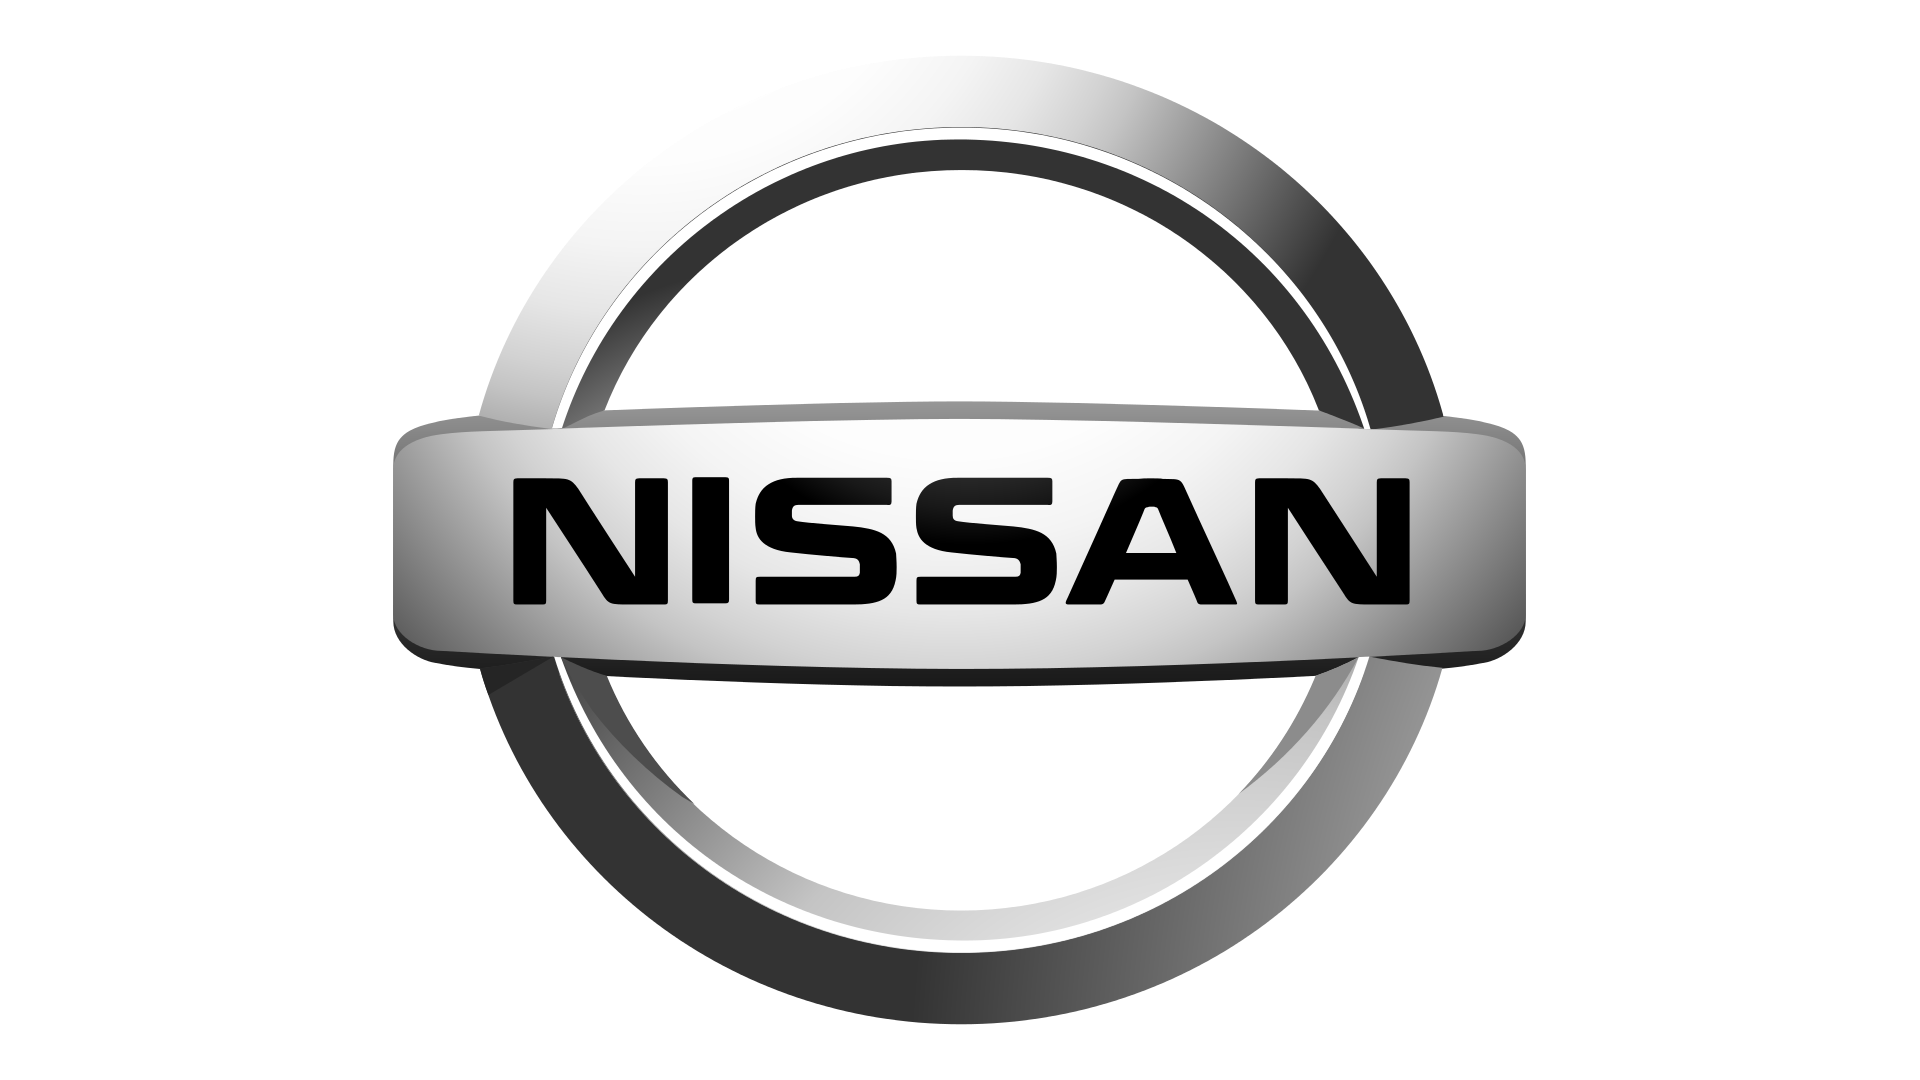 Nissan Logo | The Most Famous